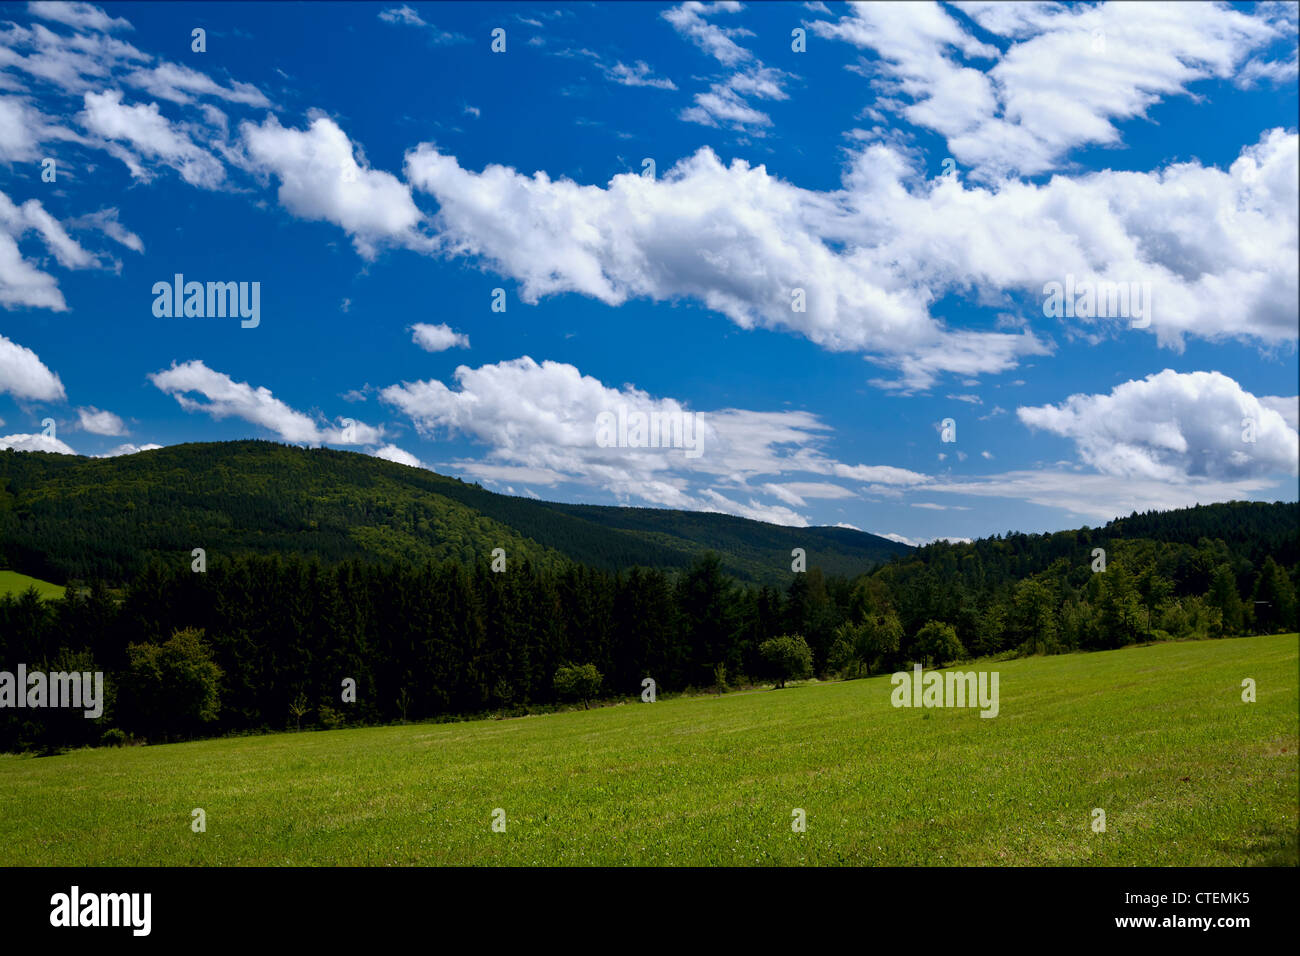 summer mountains covered with green forests and beautiful sky Stock Photo